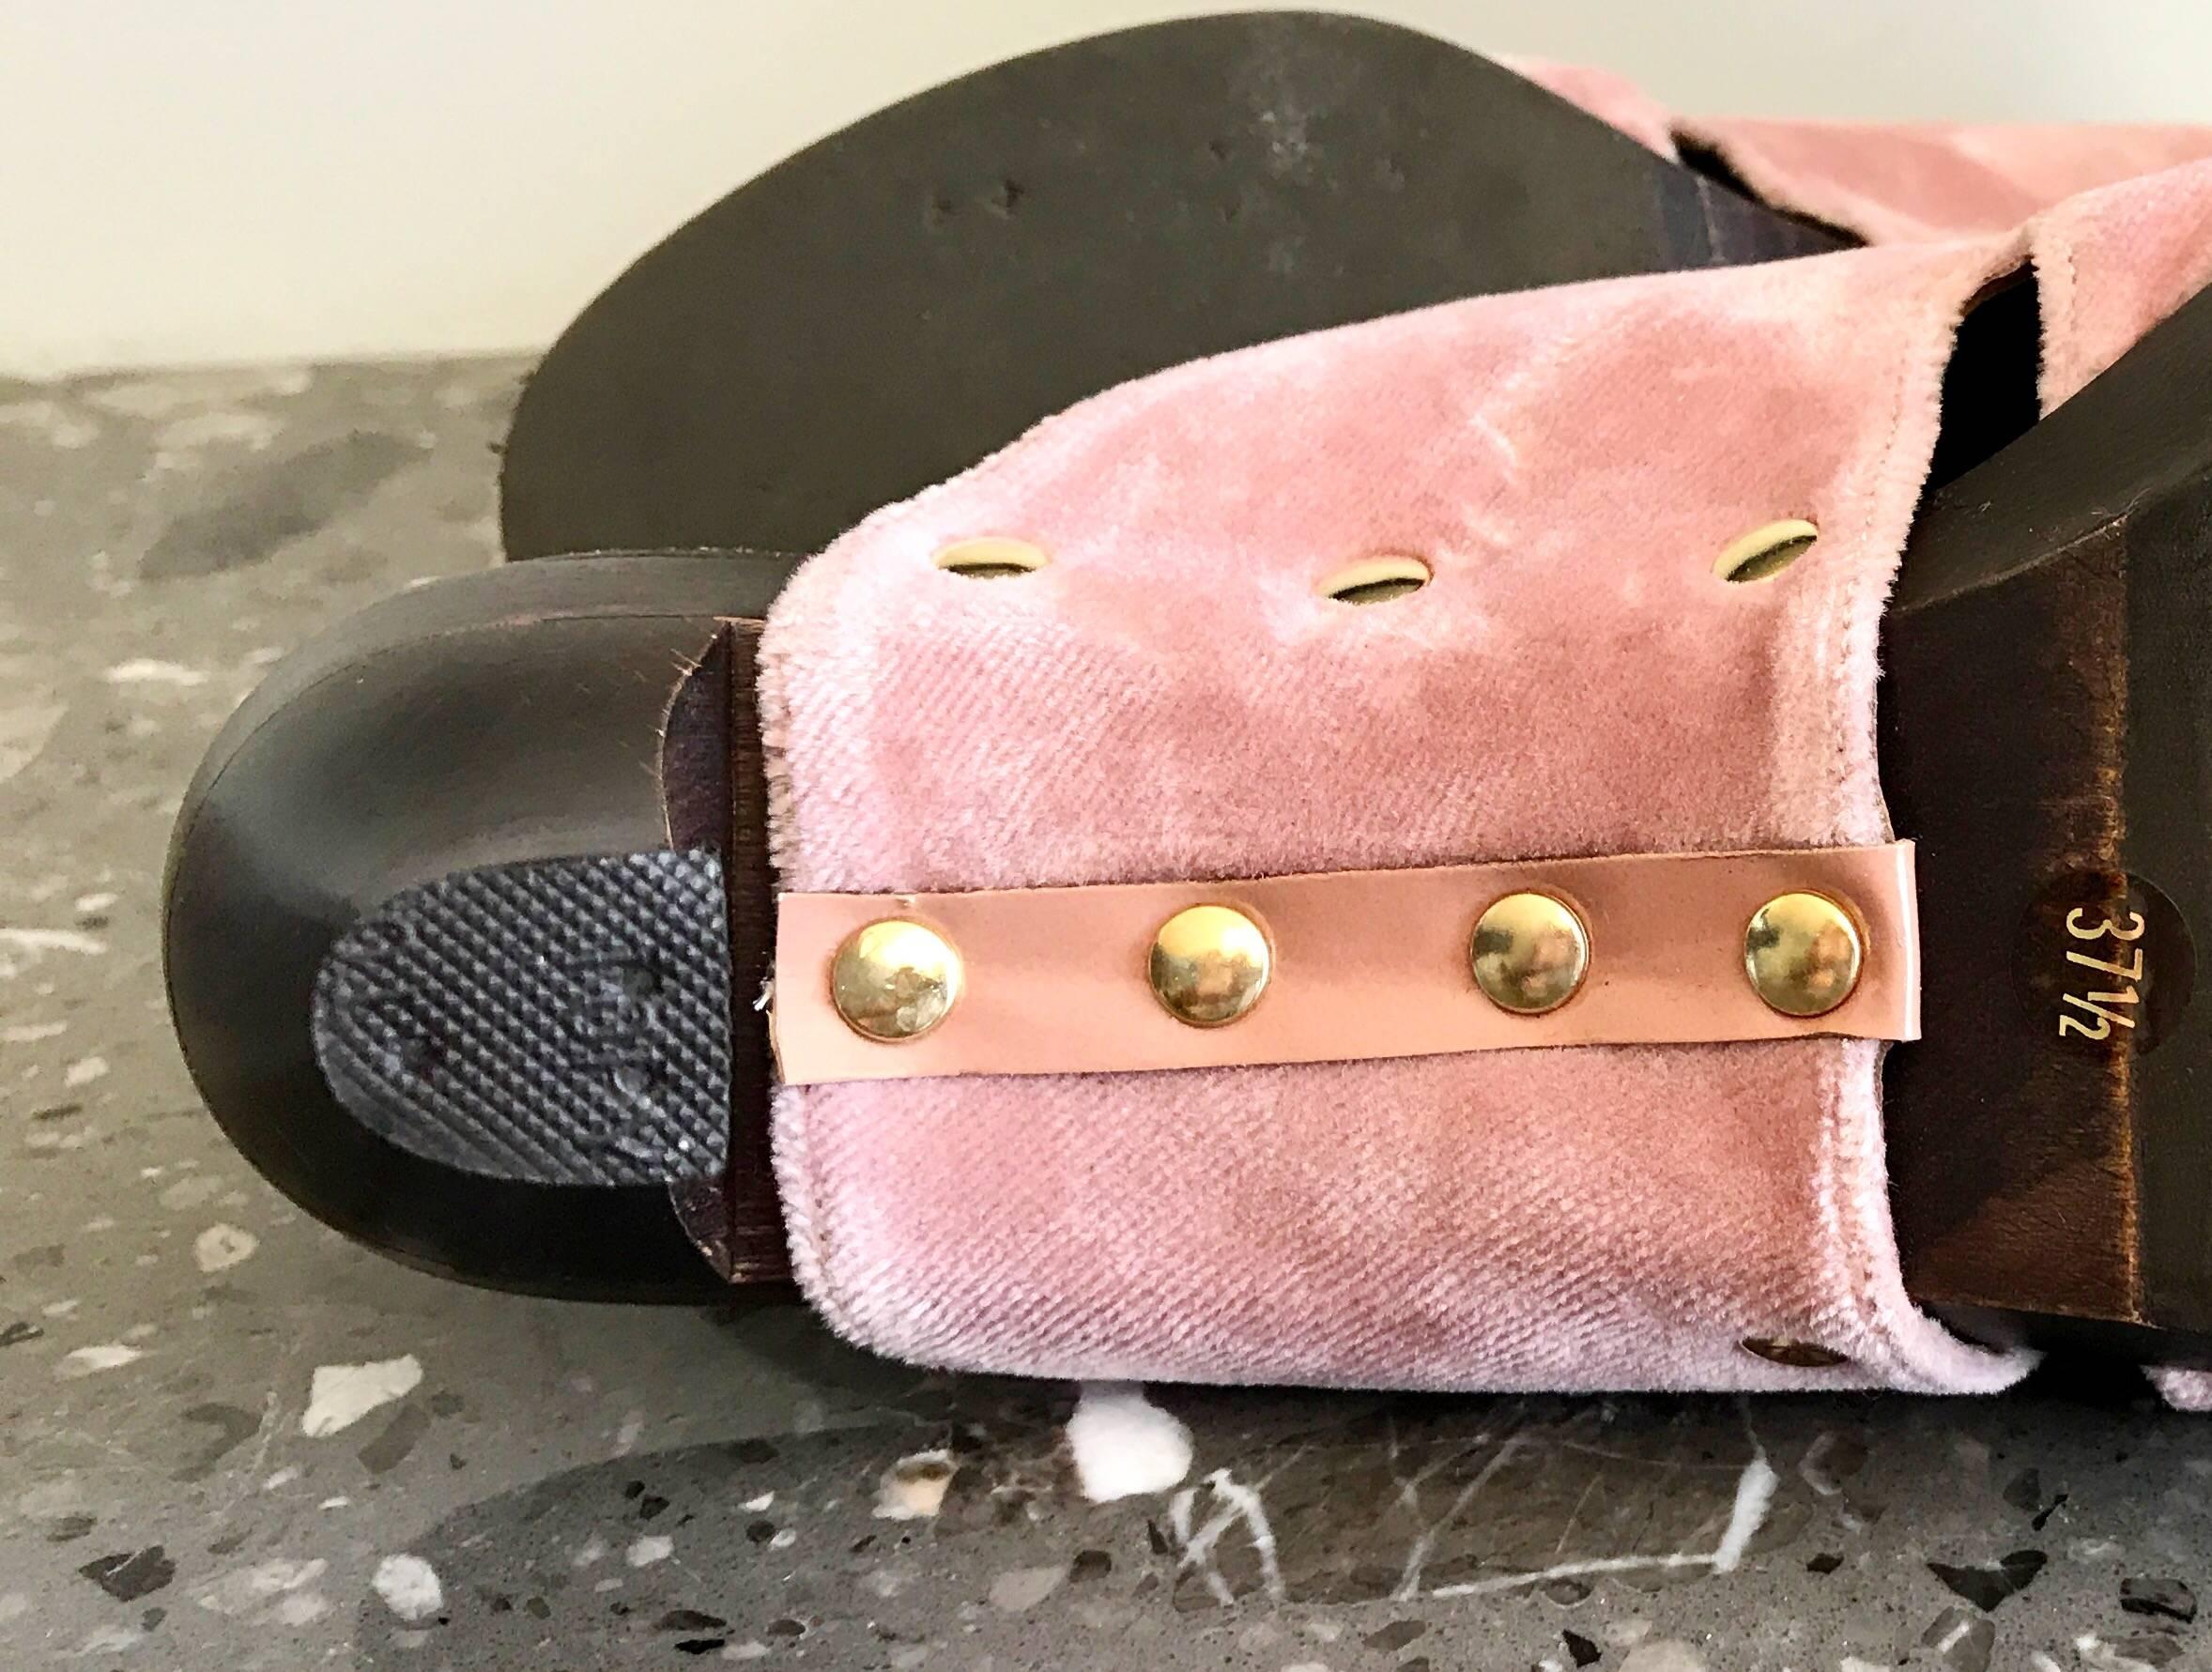 Incredible and rare 90s CHANEL, by KARL LAGERFELD pink velvet high heeled clogs! Features soft pink velvet, with gold brass studs. Slip on style is both chic and easy to wear. Super comfortable at just the right height with a slanted wooden heel.